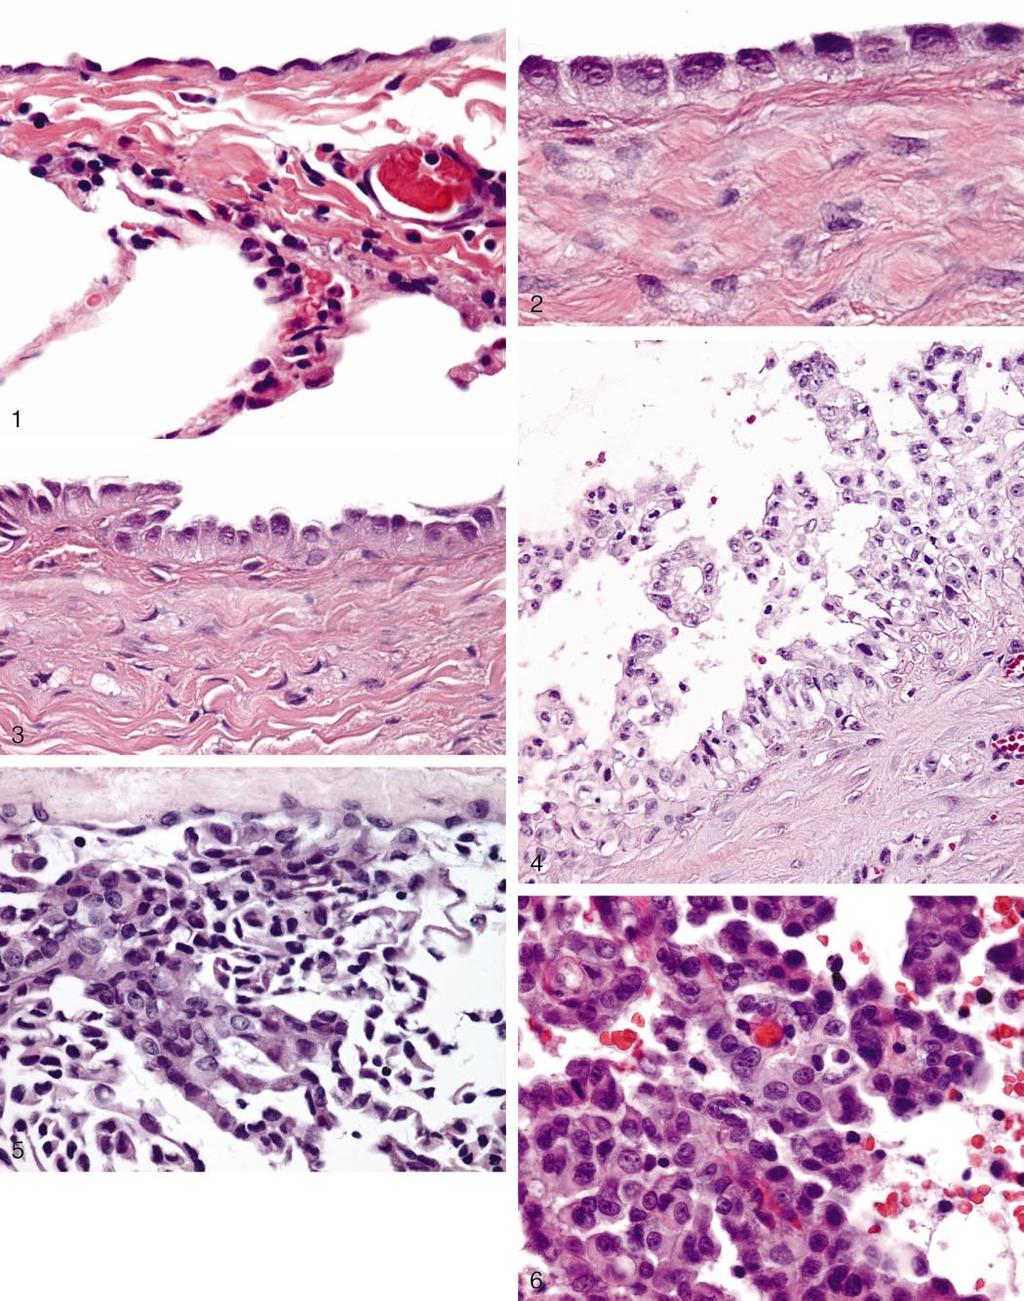 Figure 1. High-power view shows flat, inconspicuous normal mesothelial cells lining the visceral pleural surface (hematoxylin-eosin, original magnification 300). Figure 2.